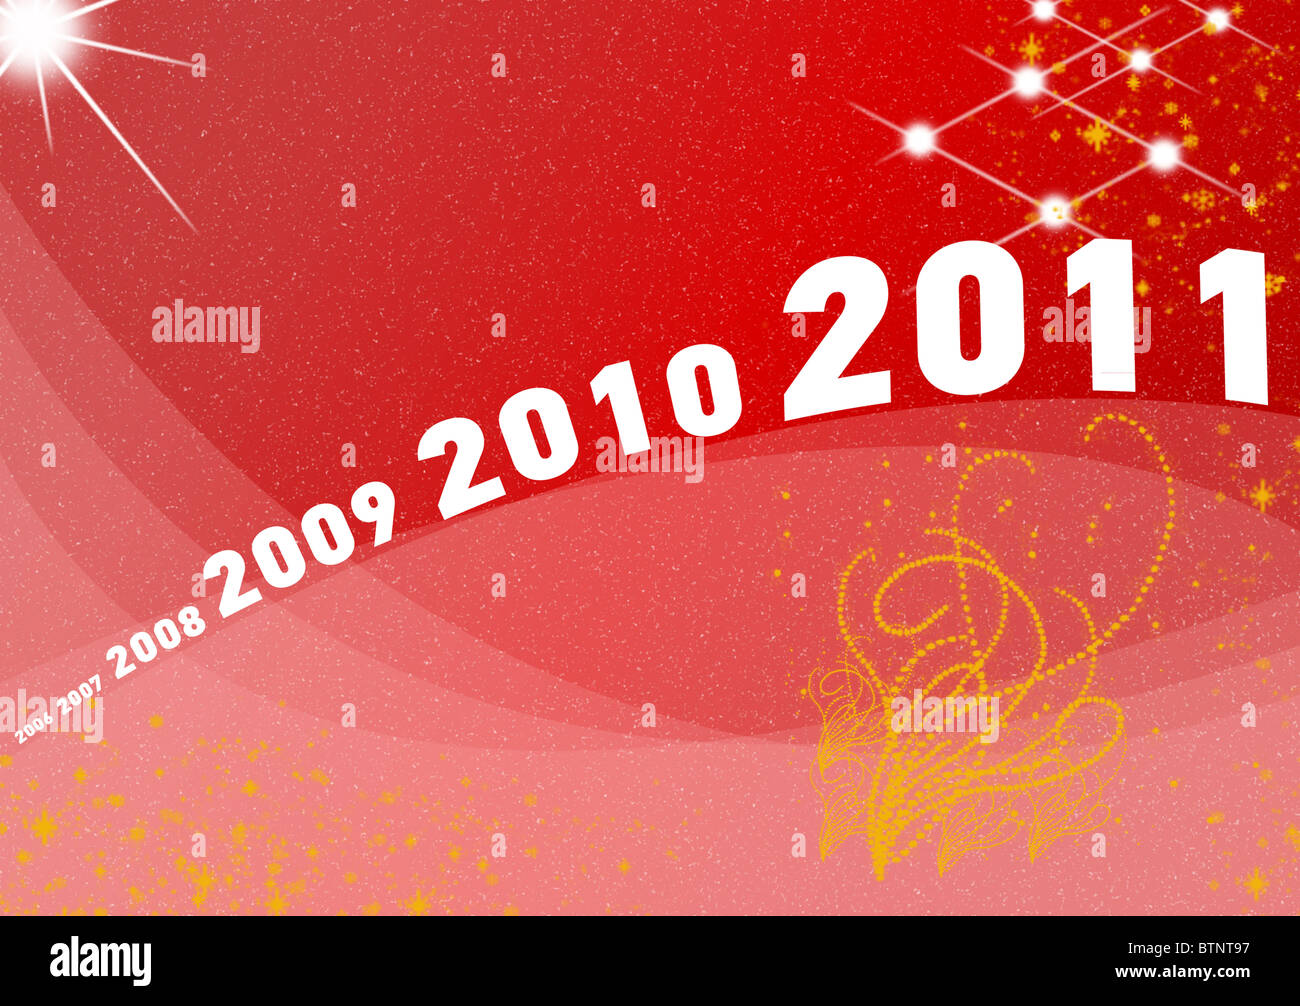 2006 - 2011 in front of a red snowy background with stars as symbol for 2011 being ahead Stock Photo